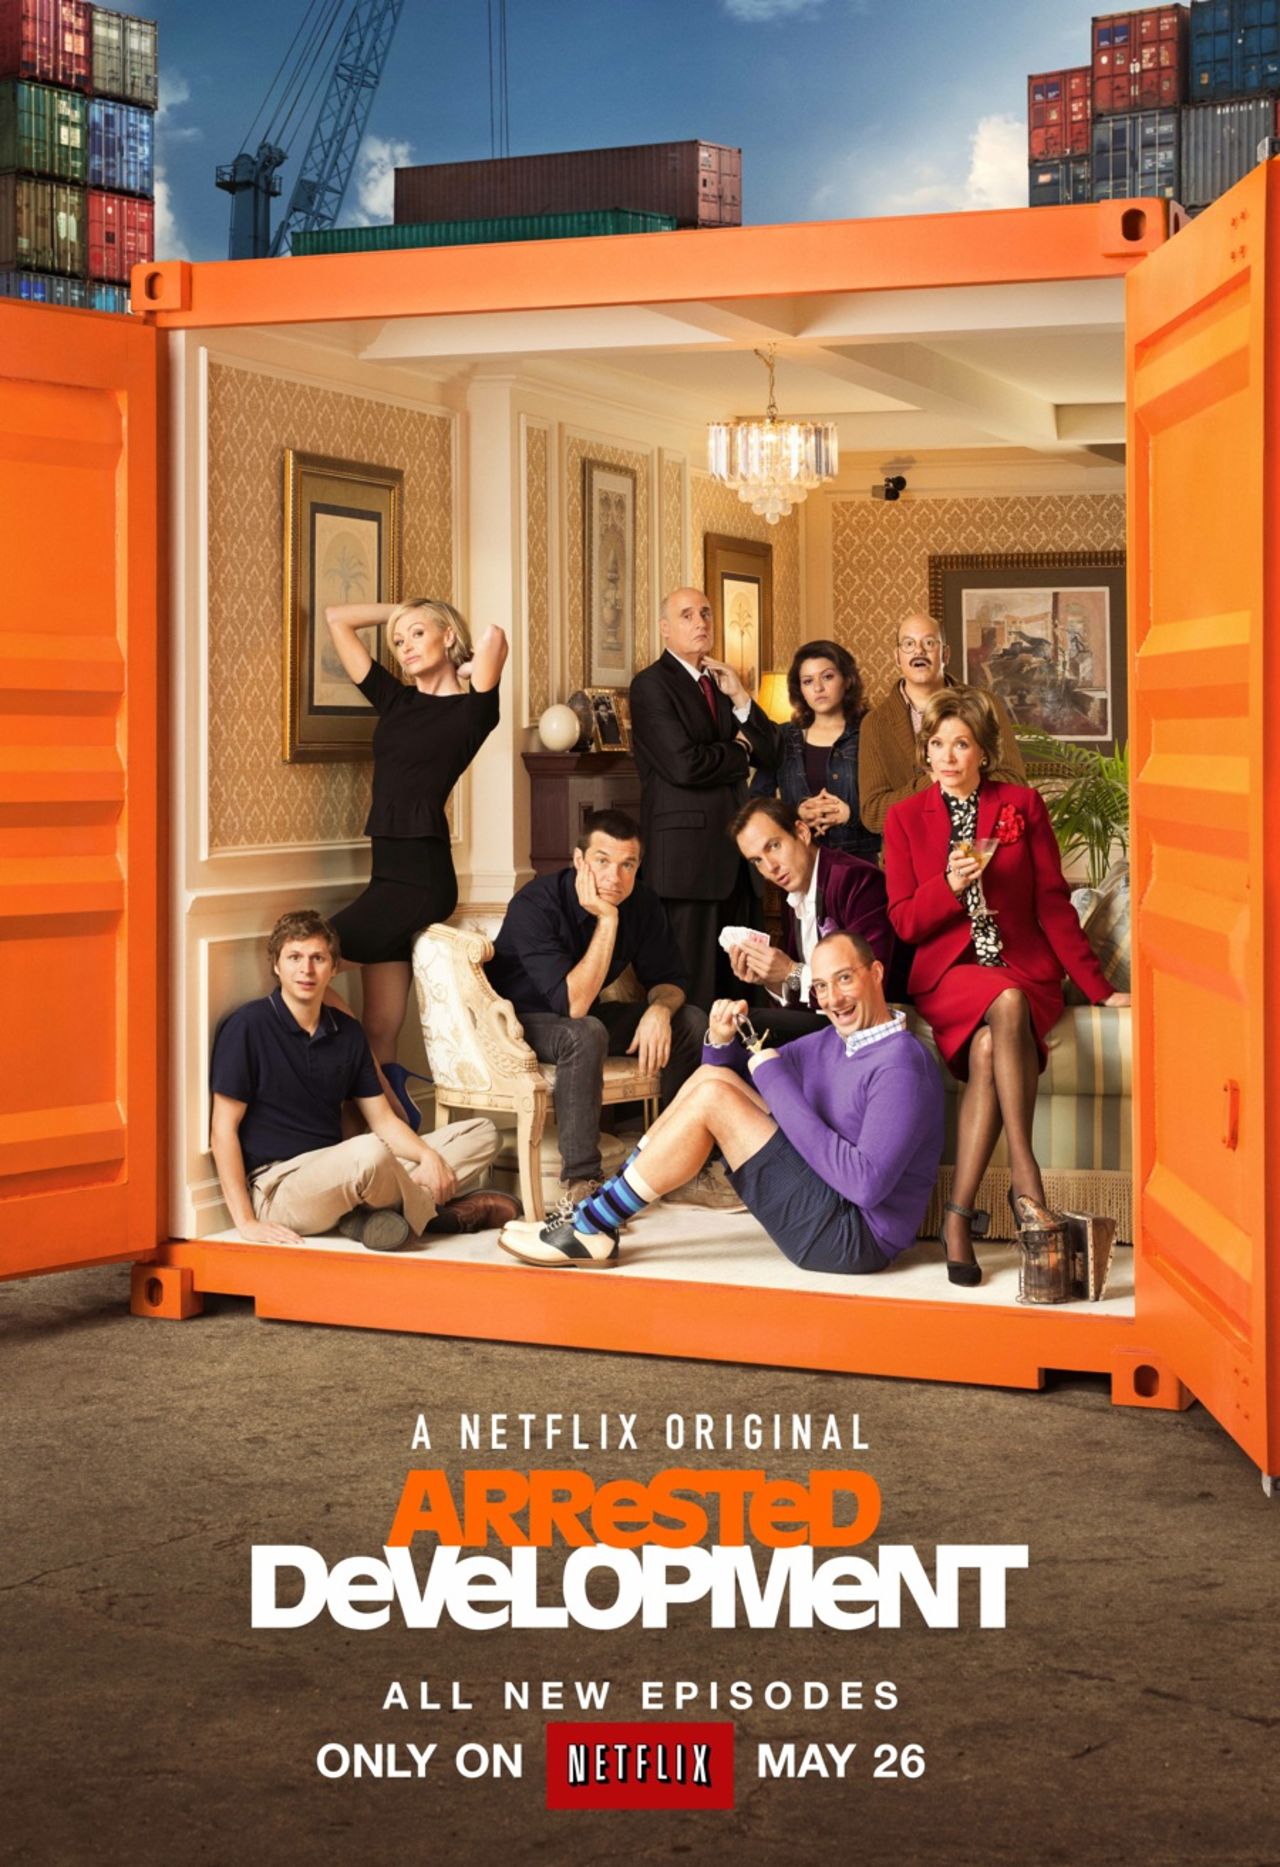 In the cult TV favorite "Arrested Development," Tony Hale (wearing purple) plays Byron "Buster" Bluth, the awkward and smothered son of George Sr. and Lucille Bluth. His home base is Mom's apartment.